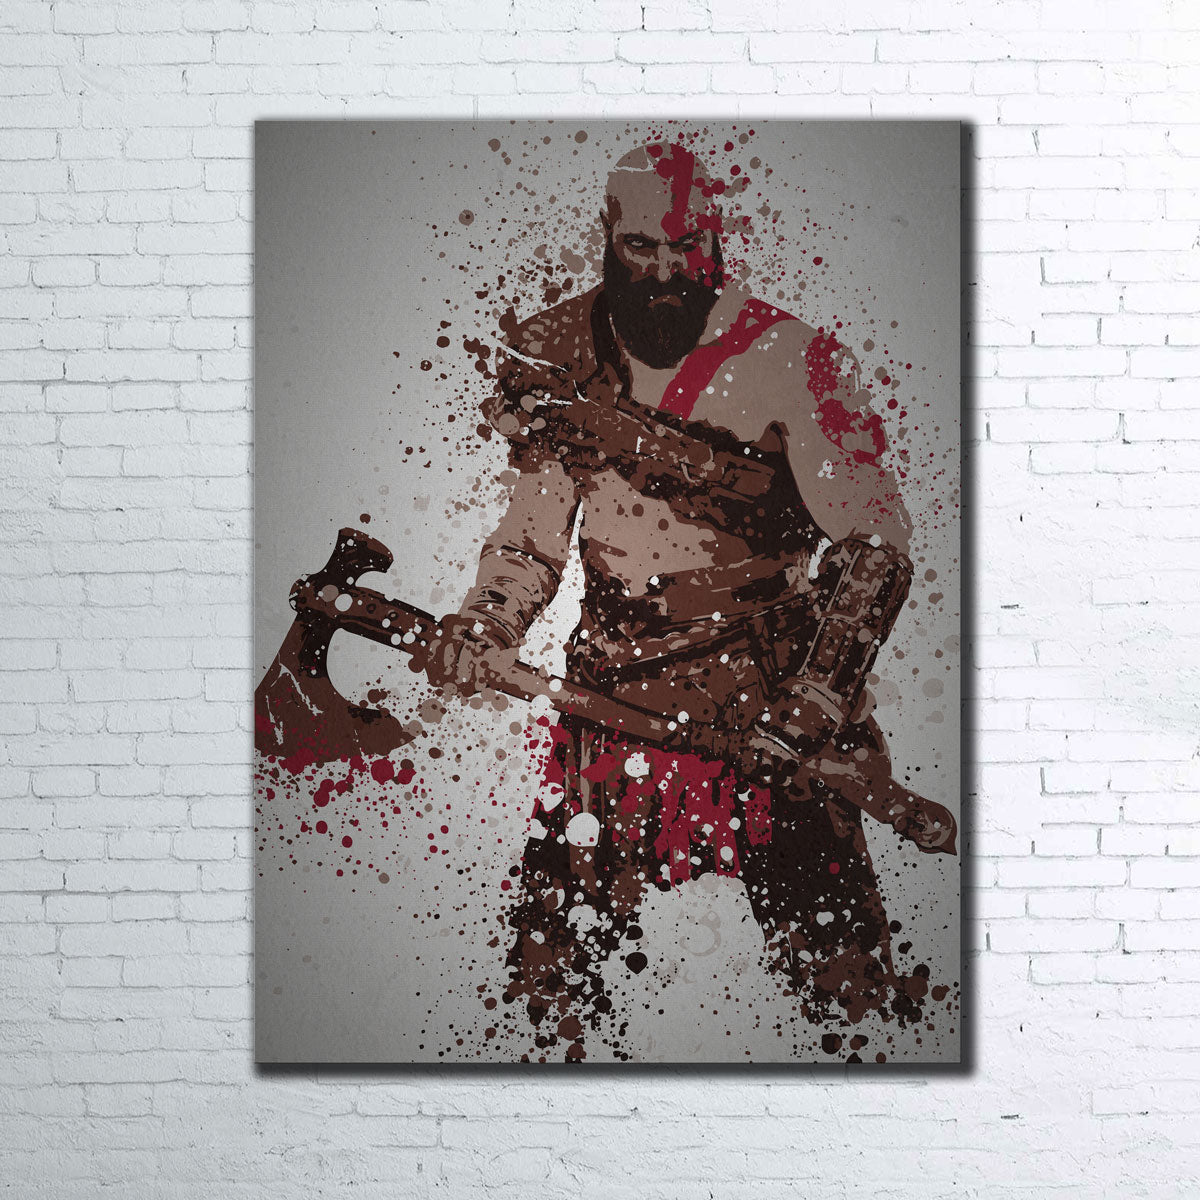 Grid for God of War: Ghost of Sparta by TheBirdSolution